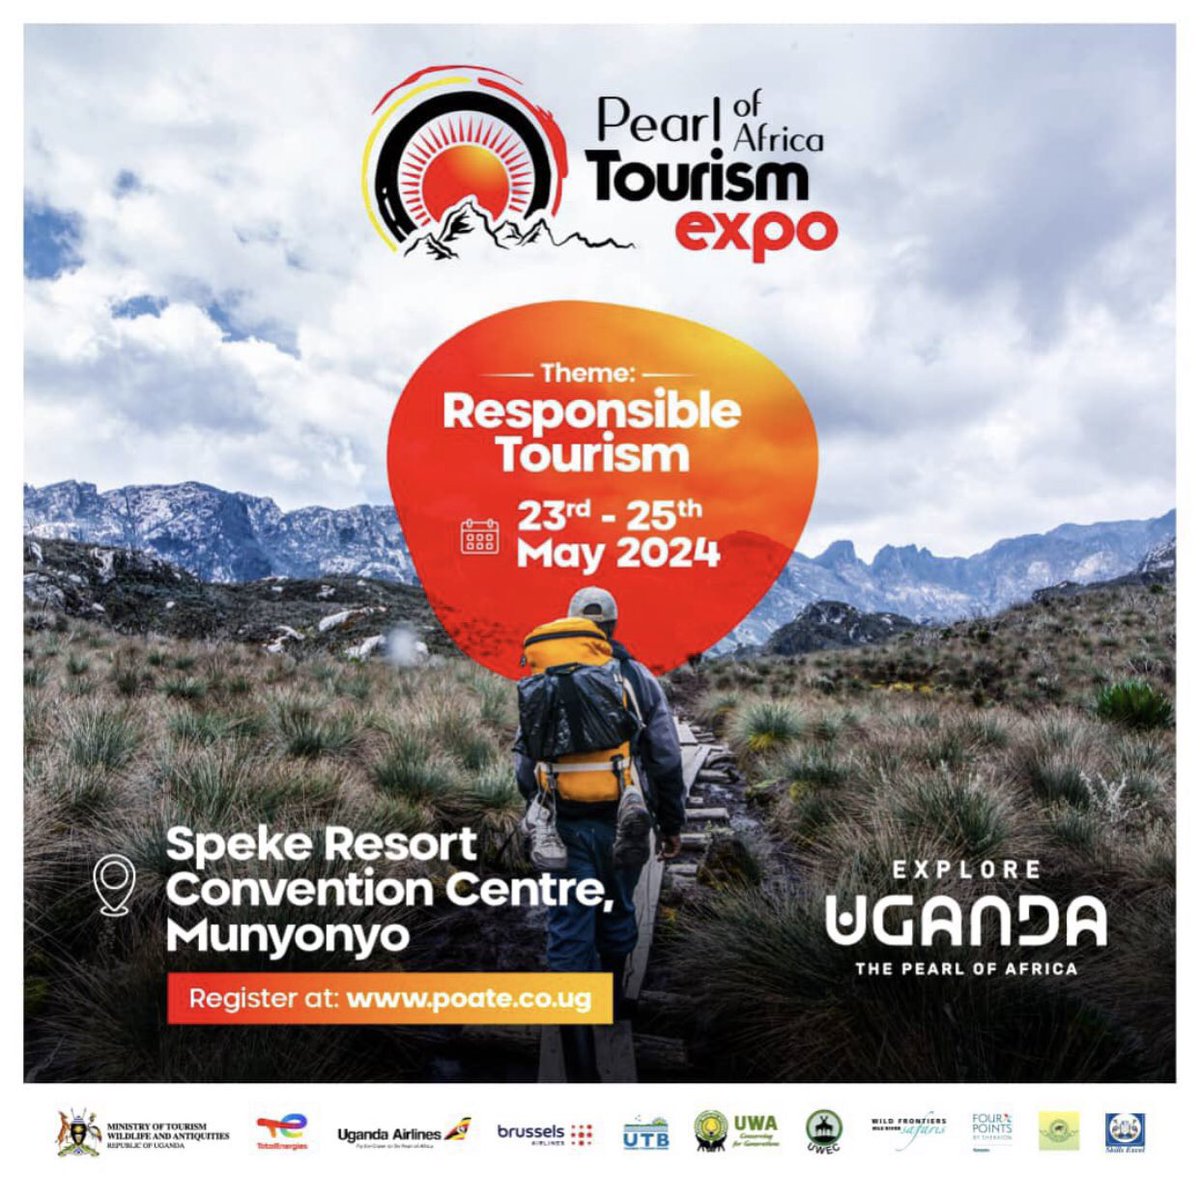 Don’t miss the Pearl of Africa Tourism Expo (POATE) 2024 taking place from May 23rd to 25th, 2024 at Speke Resort Munyonyo 

Entrance fee: UGX.10,000 per day.

#POATE2024 || #ResponsibleTourism